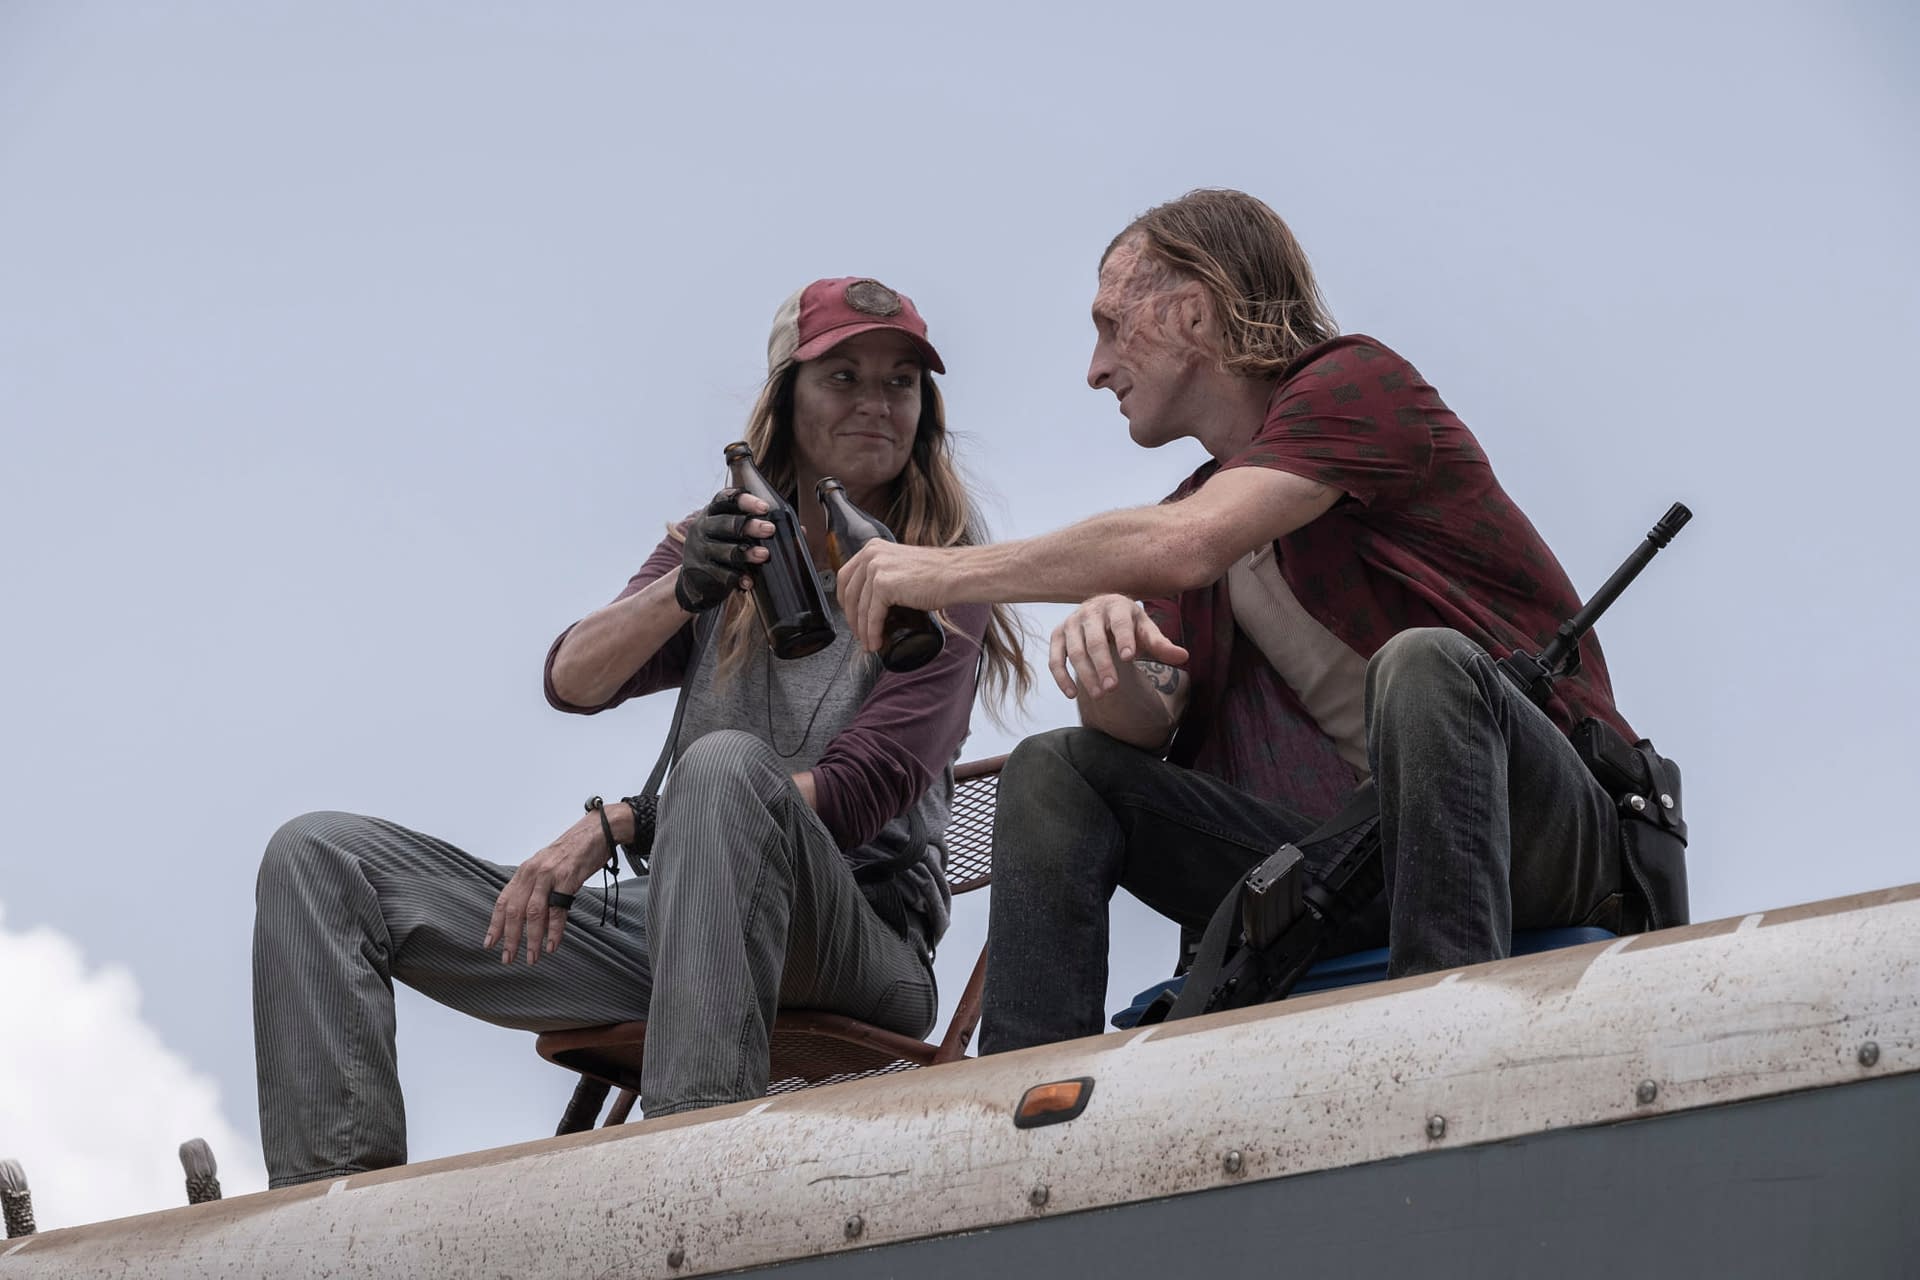 "Fear the Walking Dead" Season 5, Episode 12 "Ner Tamid": Dwight Opens Up to Sarah [PREVIEW]